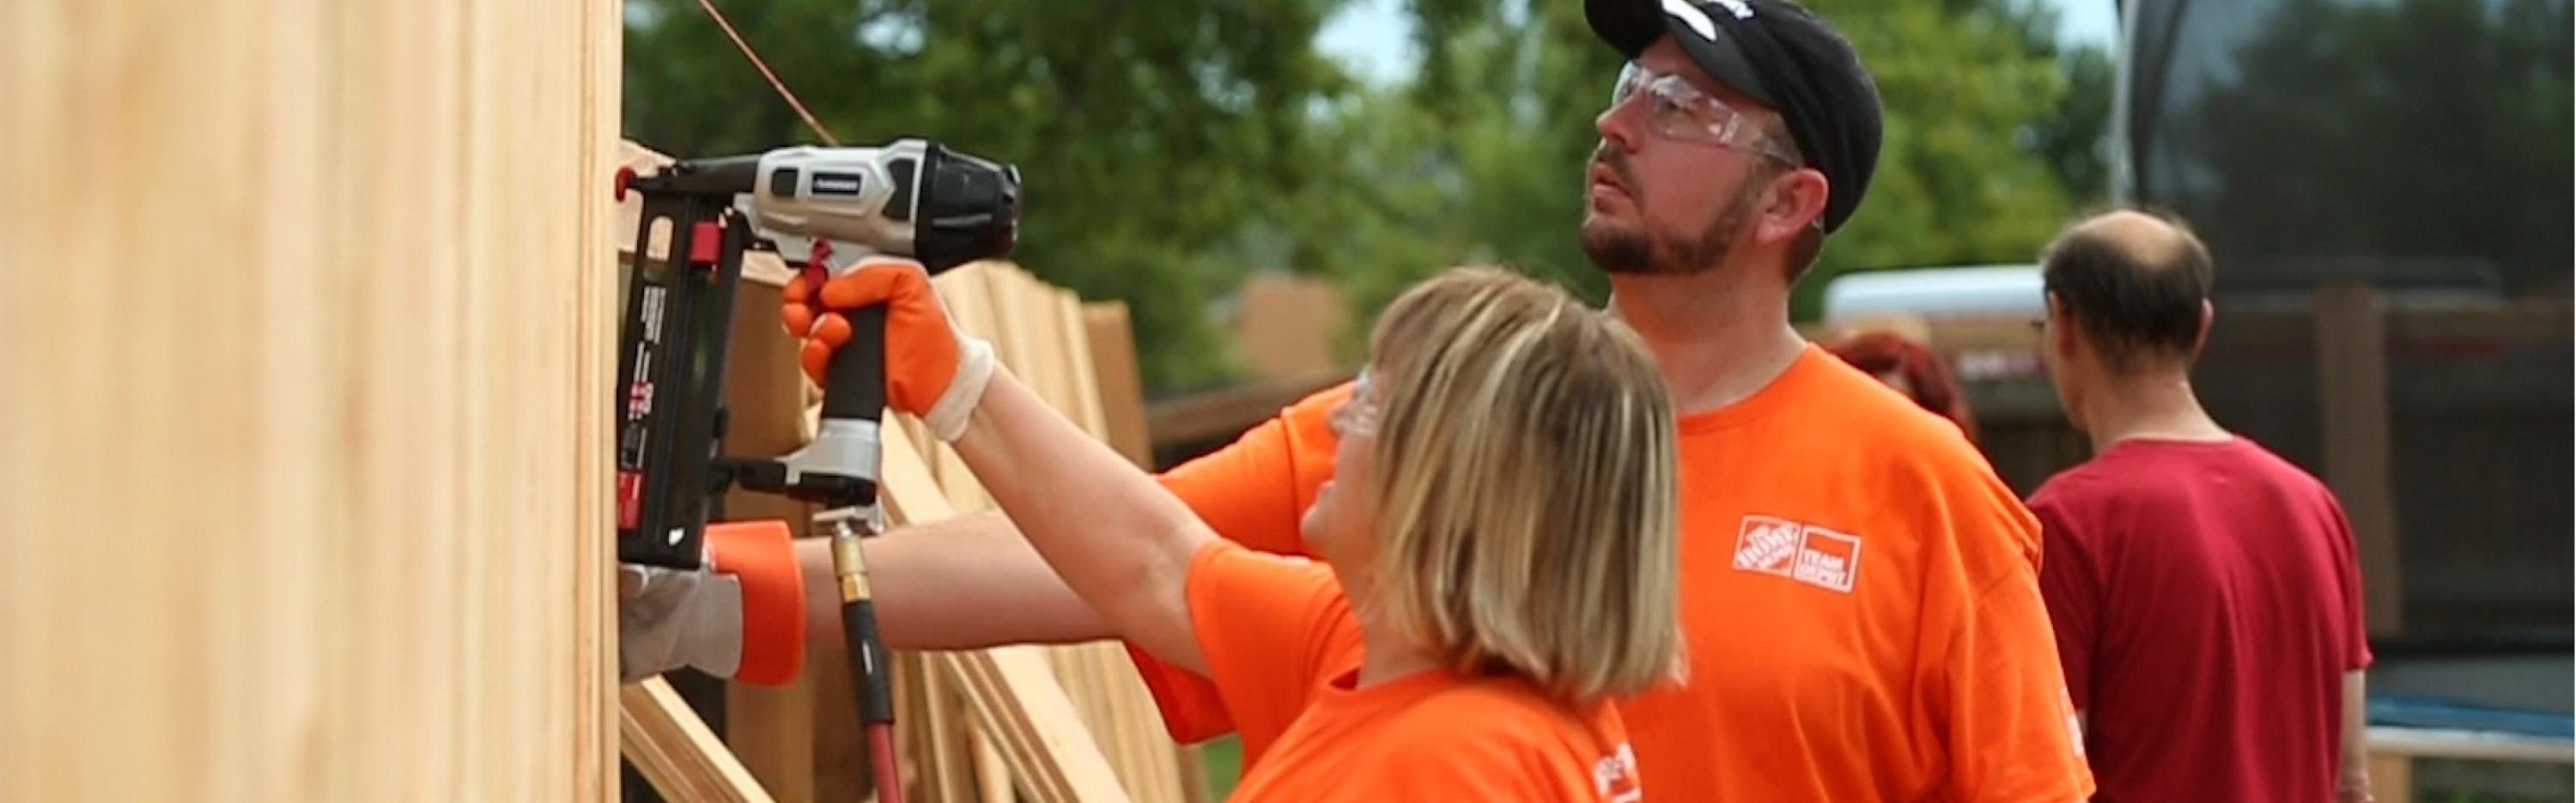 Team Depot and Husky Tools Drill 